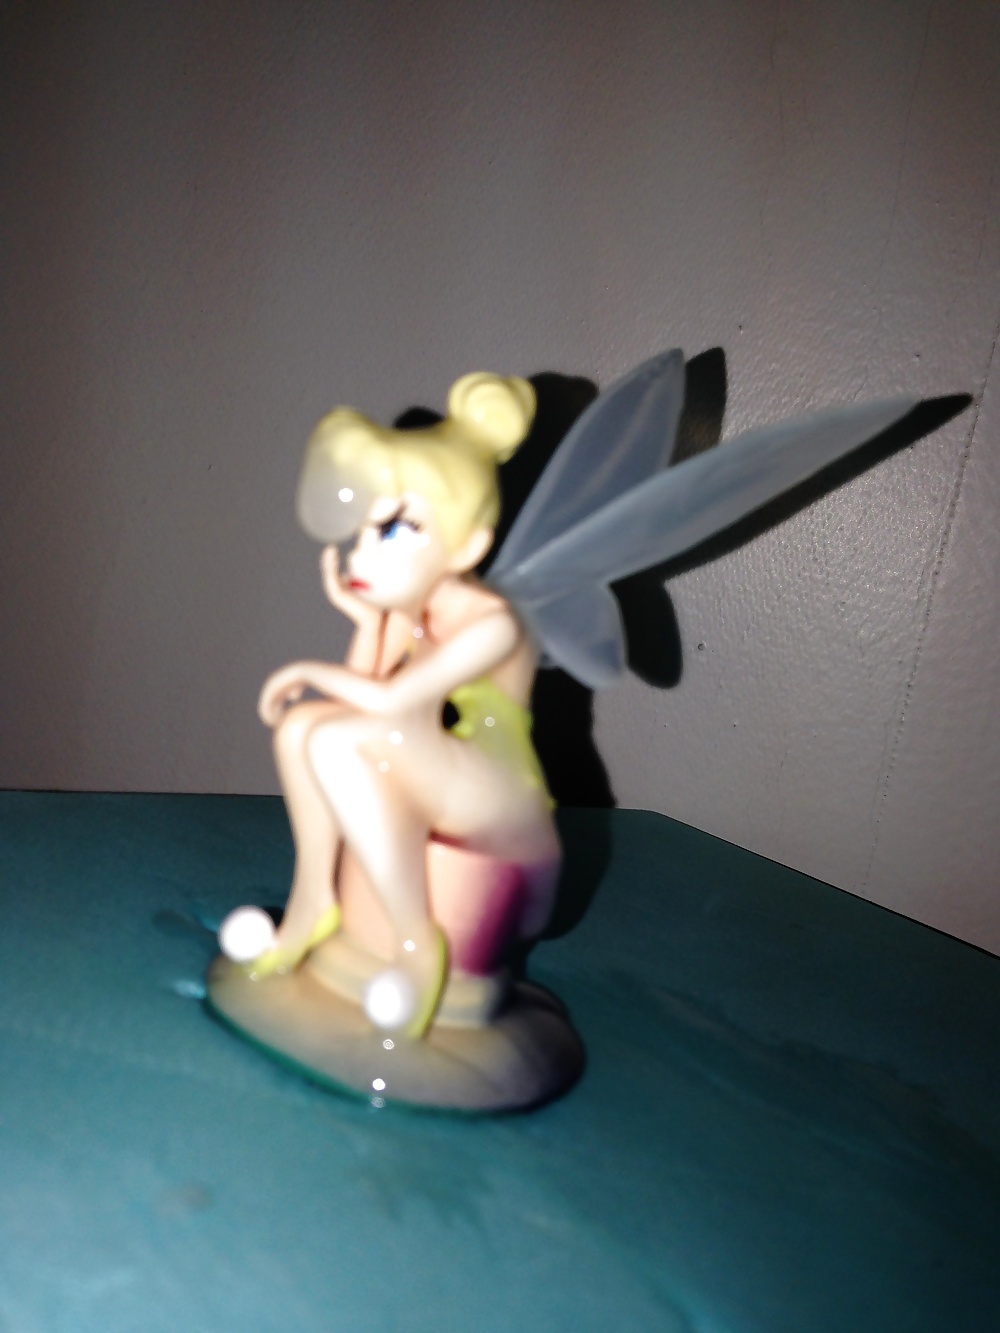 Sassy Tinkerbell  covered in cum #30168543